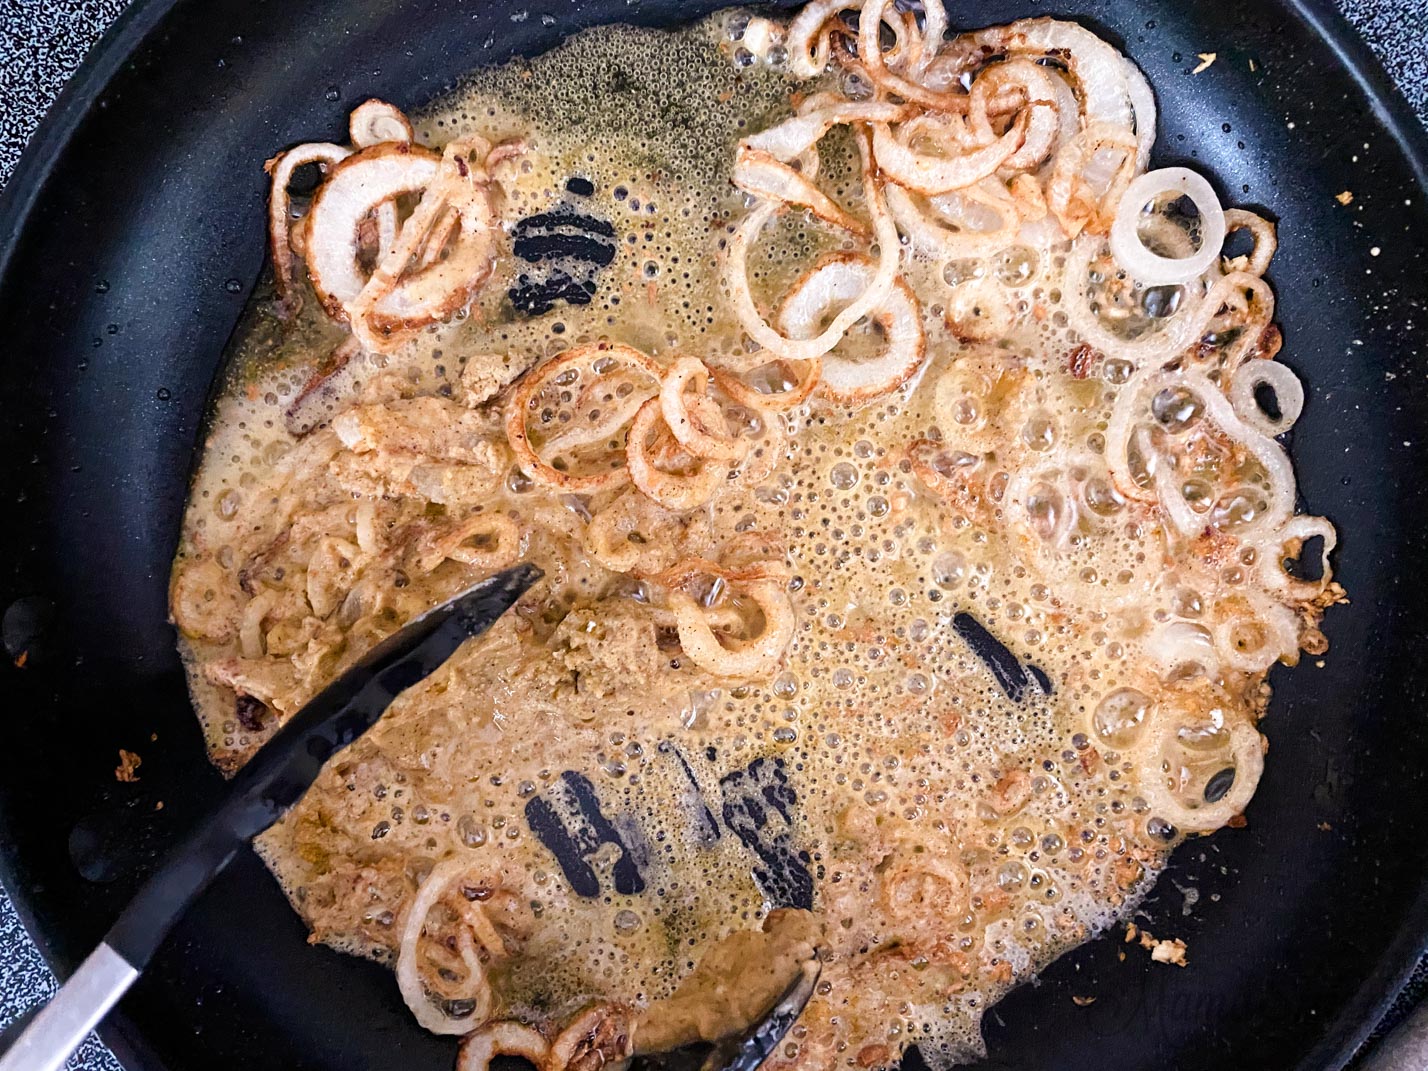 Onions frying in a skillet with just a bit of chicken broth.